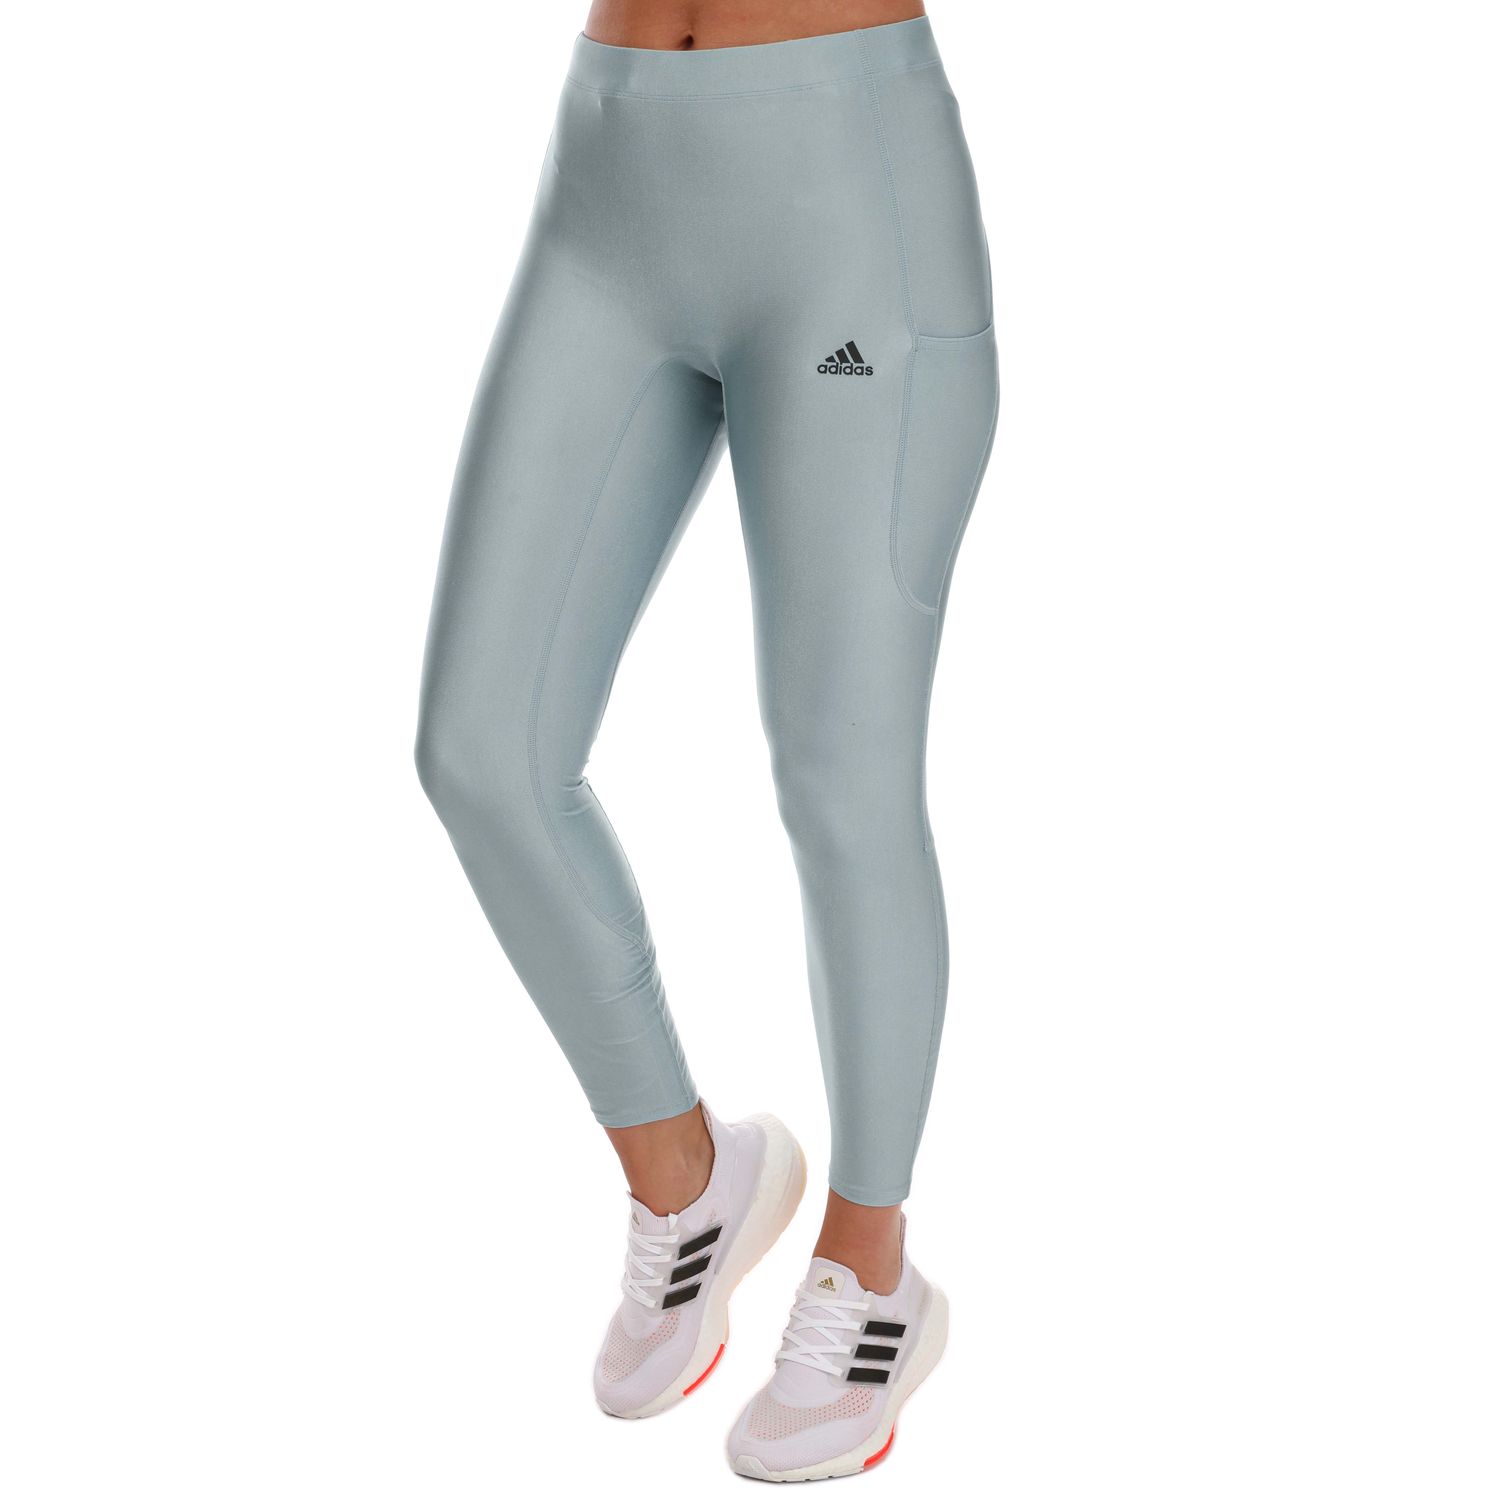 Grey blue adidas Womens Fastlmpact Shiny Running 7/8 Tights - Get The Label